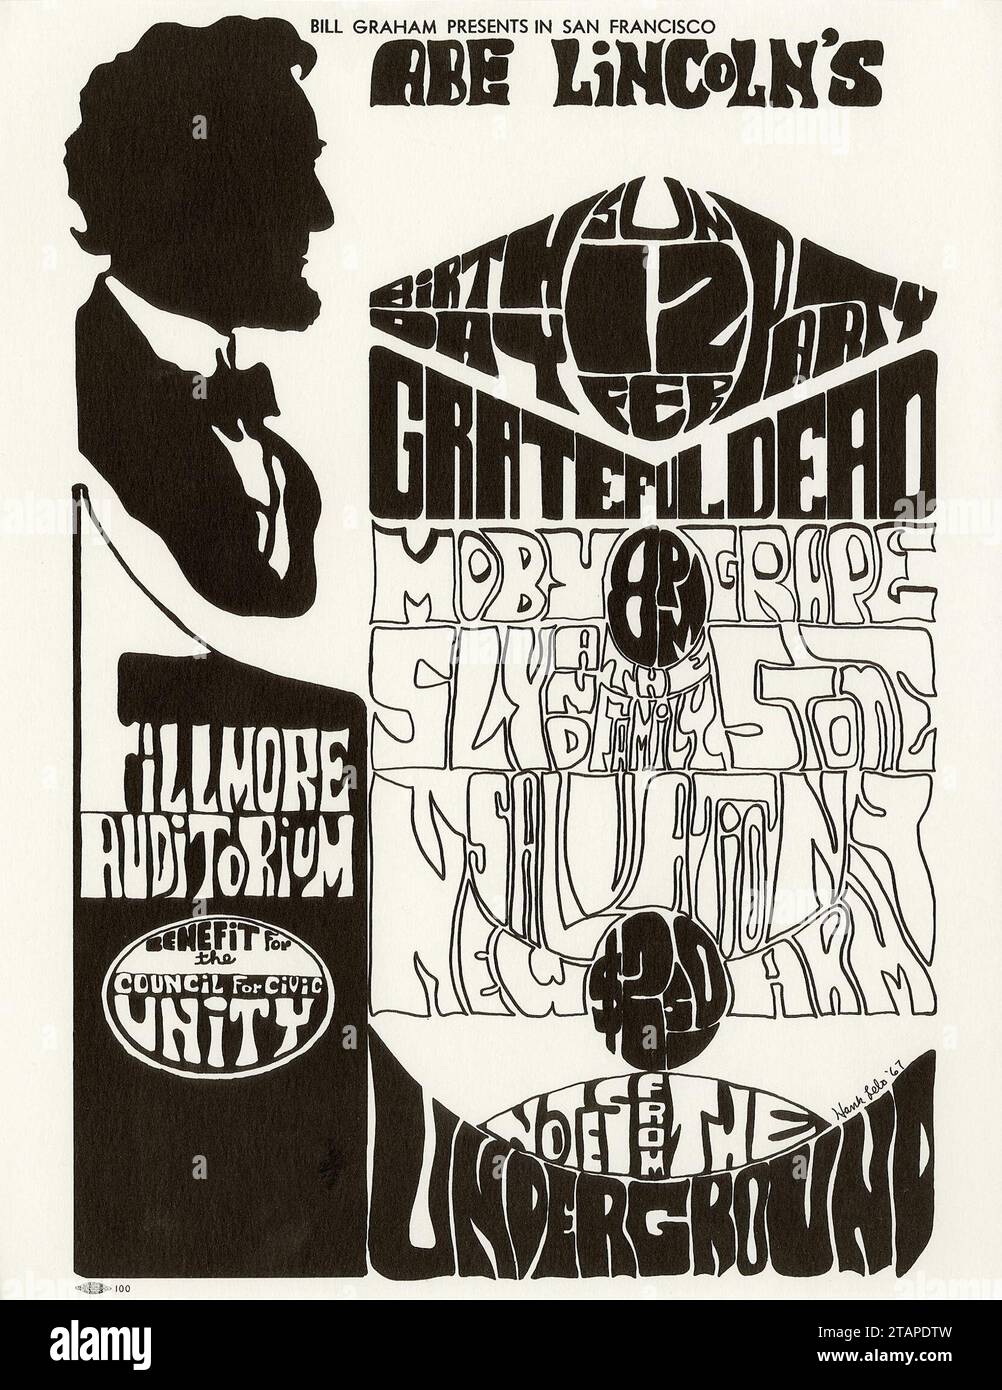 Bill Graham presents in San Francisco - Abe Lincoln's Birthday Party - Grateful Dead, Sly and The Family Stone, Salvation, New Army, Notes from the Underground - Fillmore Auditorium Concert Handbill 1967 Stock Photo